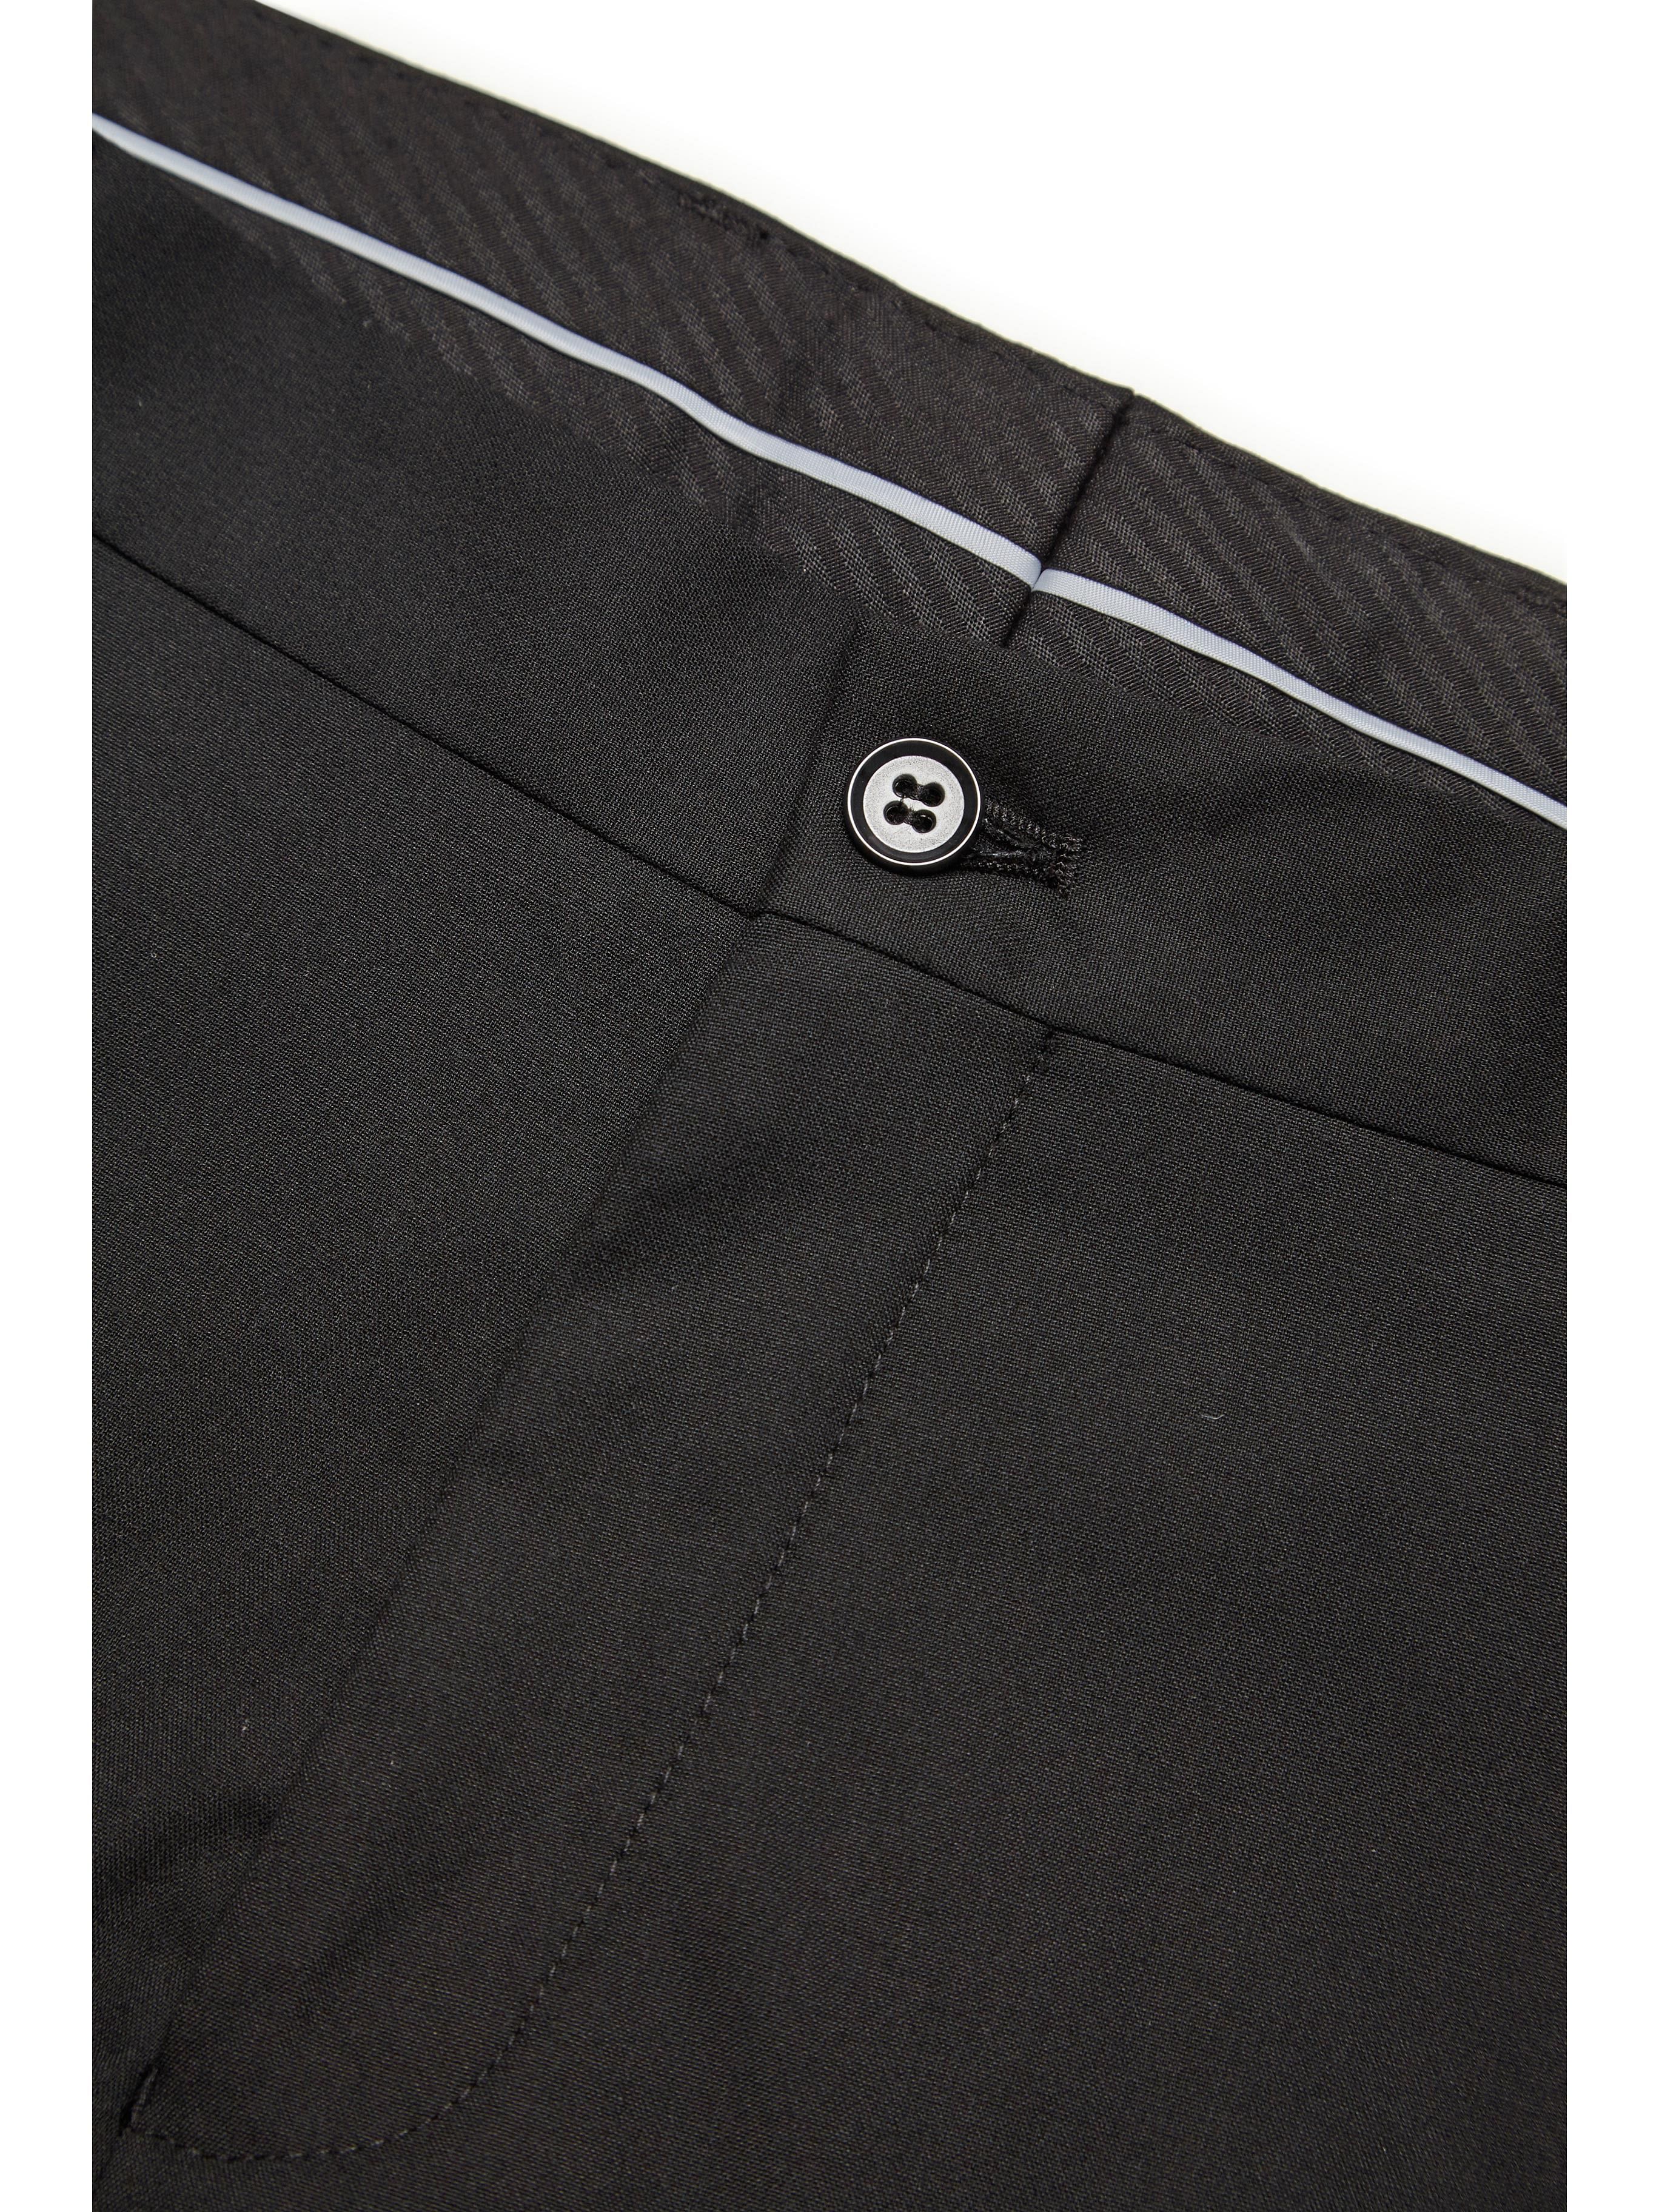 Black Slim Fit Suit Trousers with Stretch